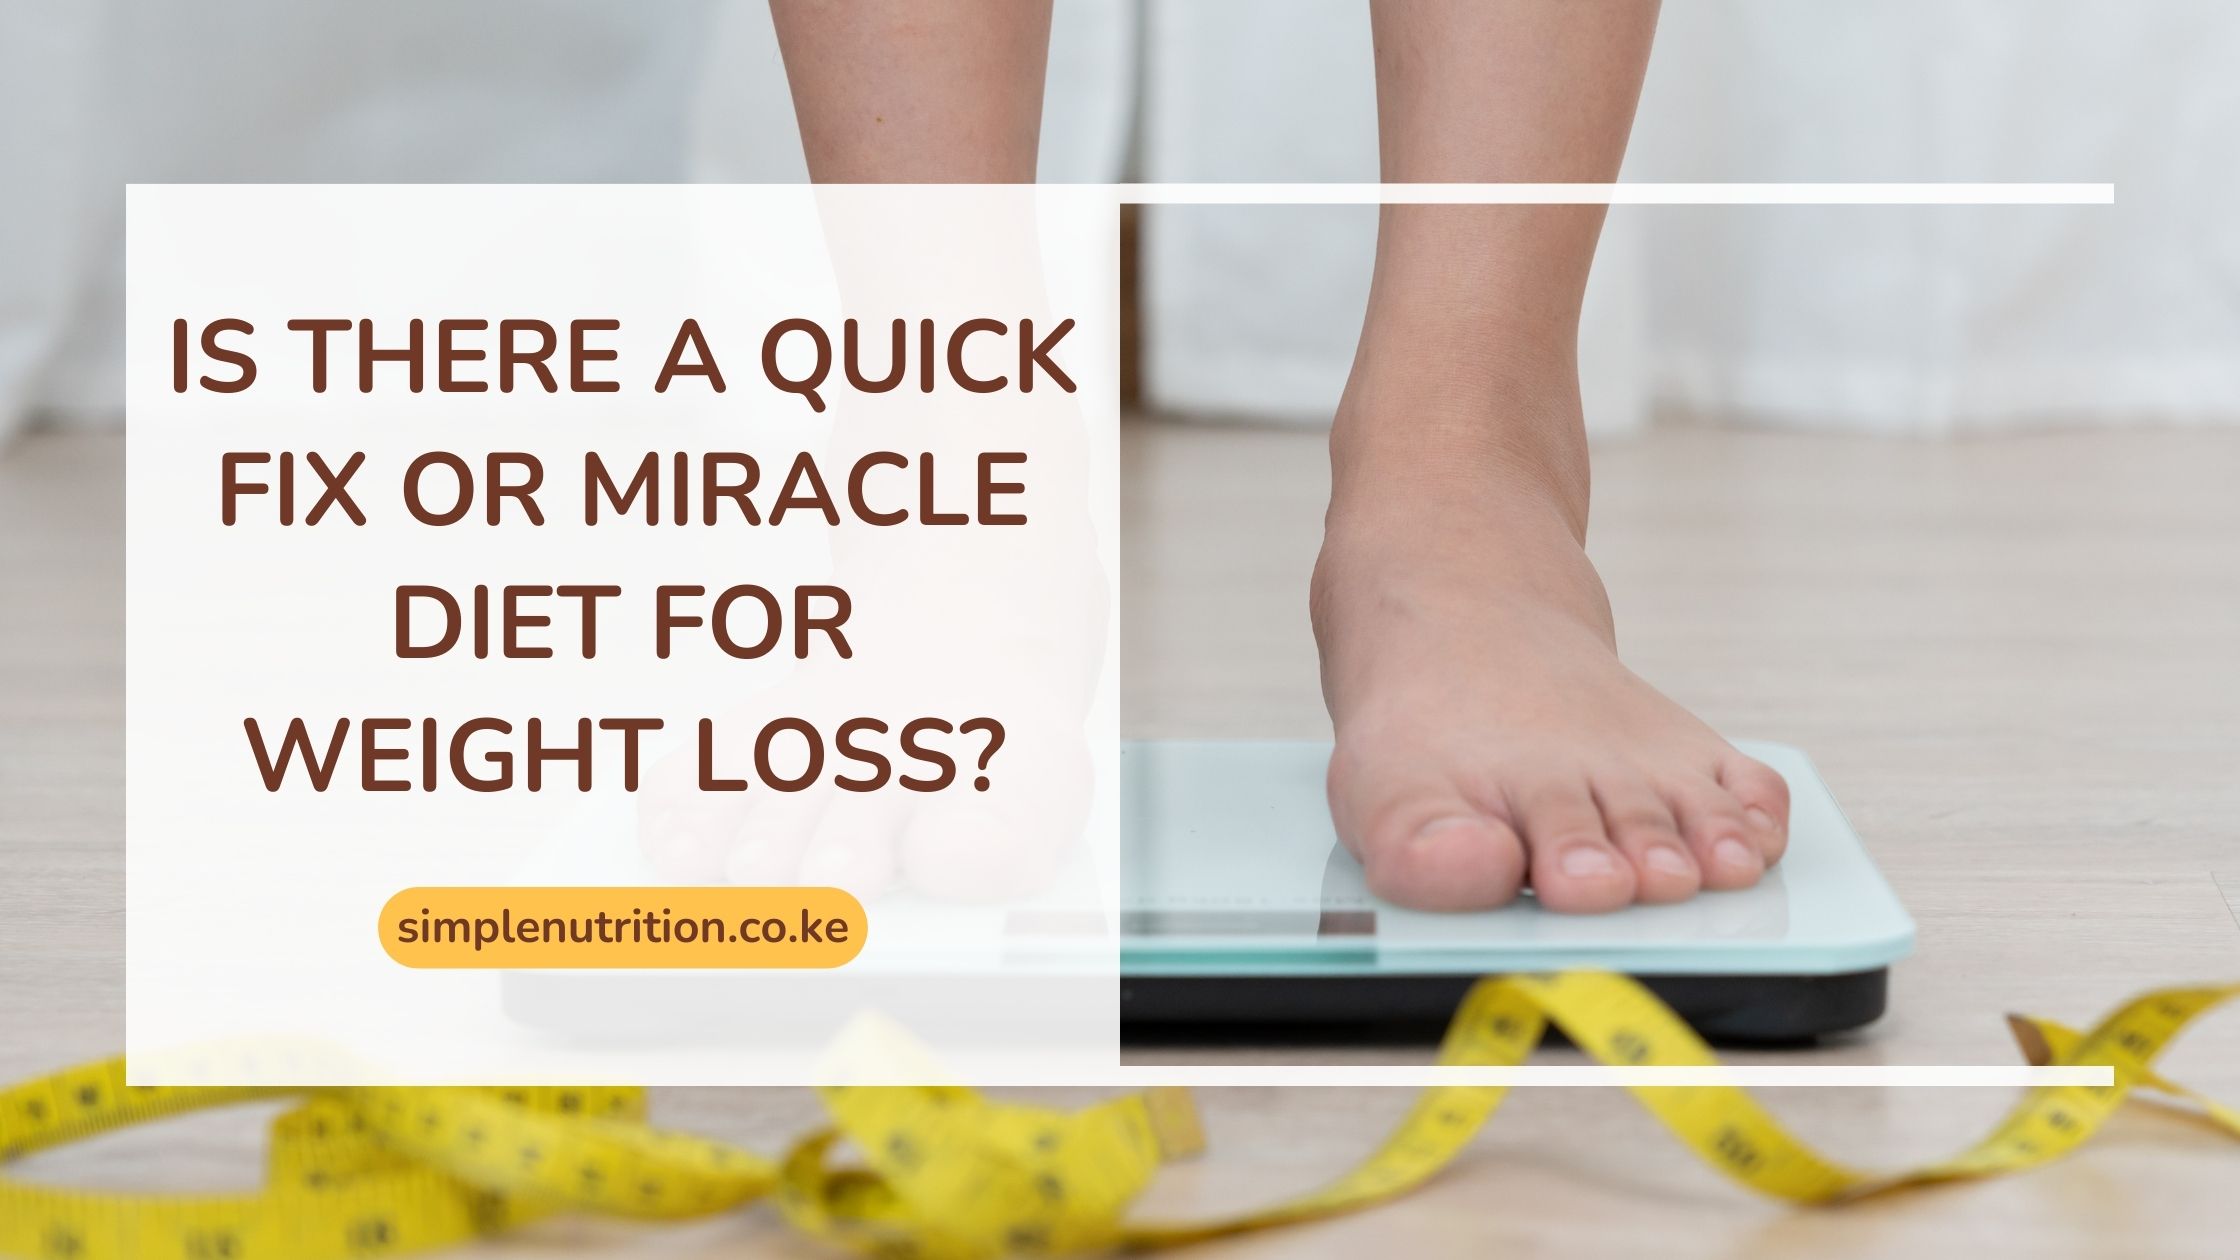 Is there a quick fix or miracle diet for weight loss?